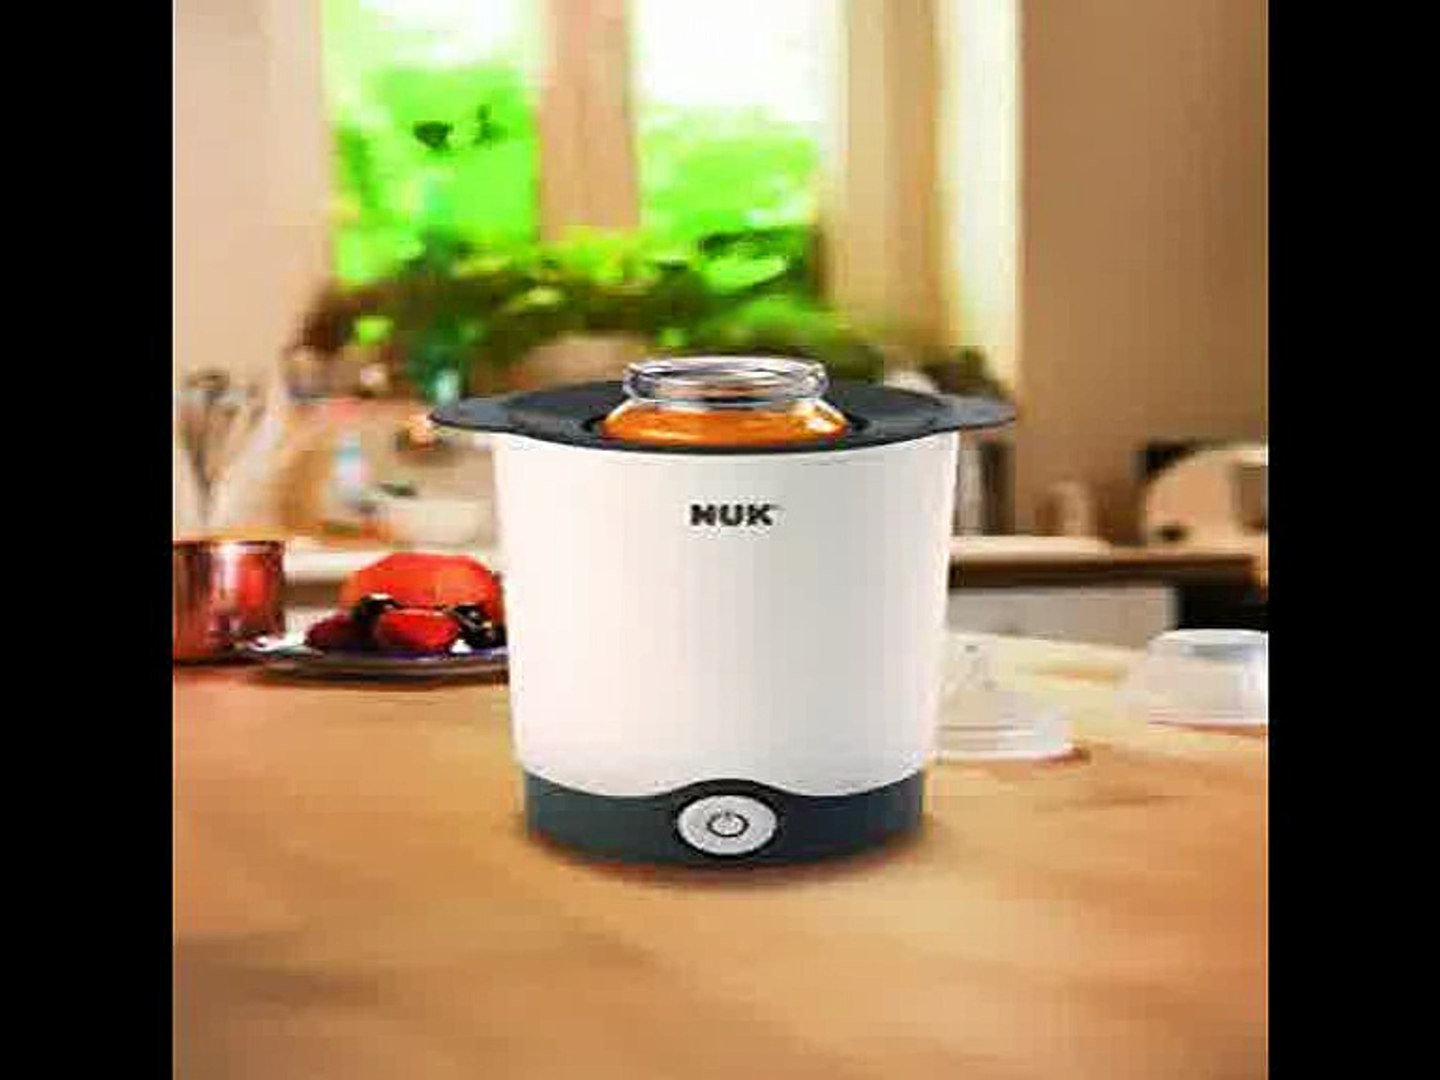 NUK Thermo Express Bottle Warmer -] - video Dailymotion